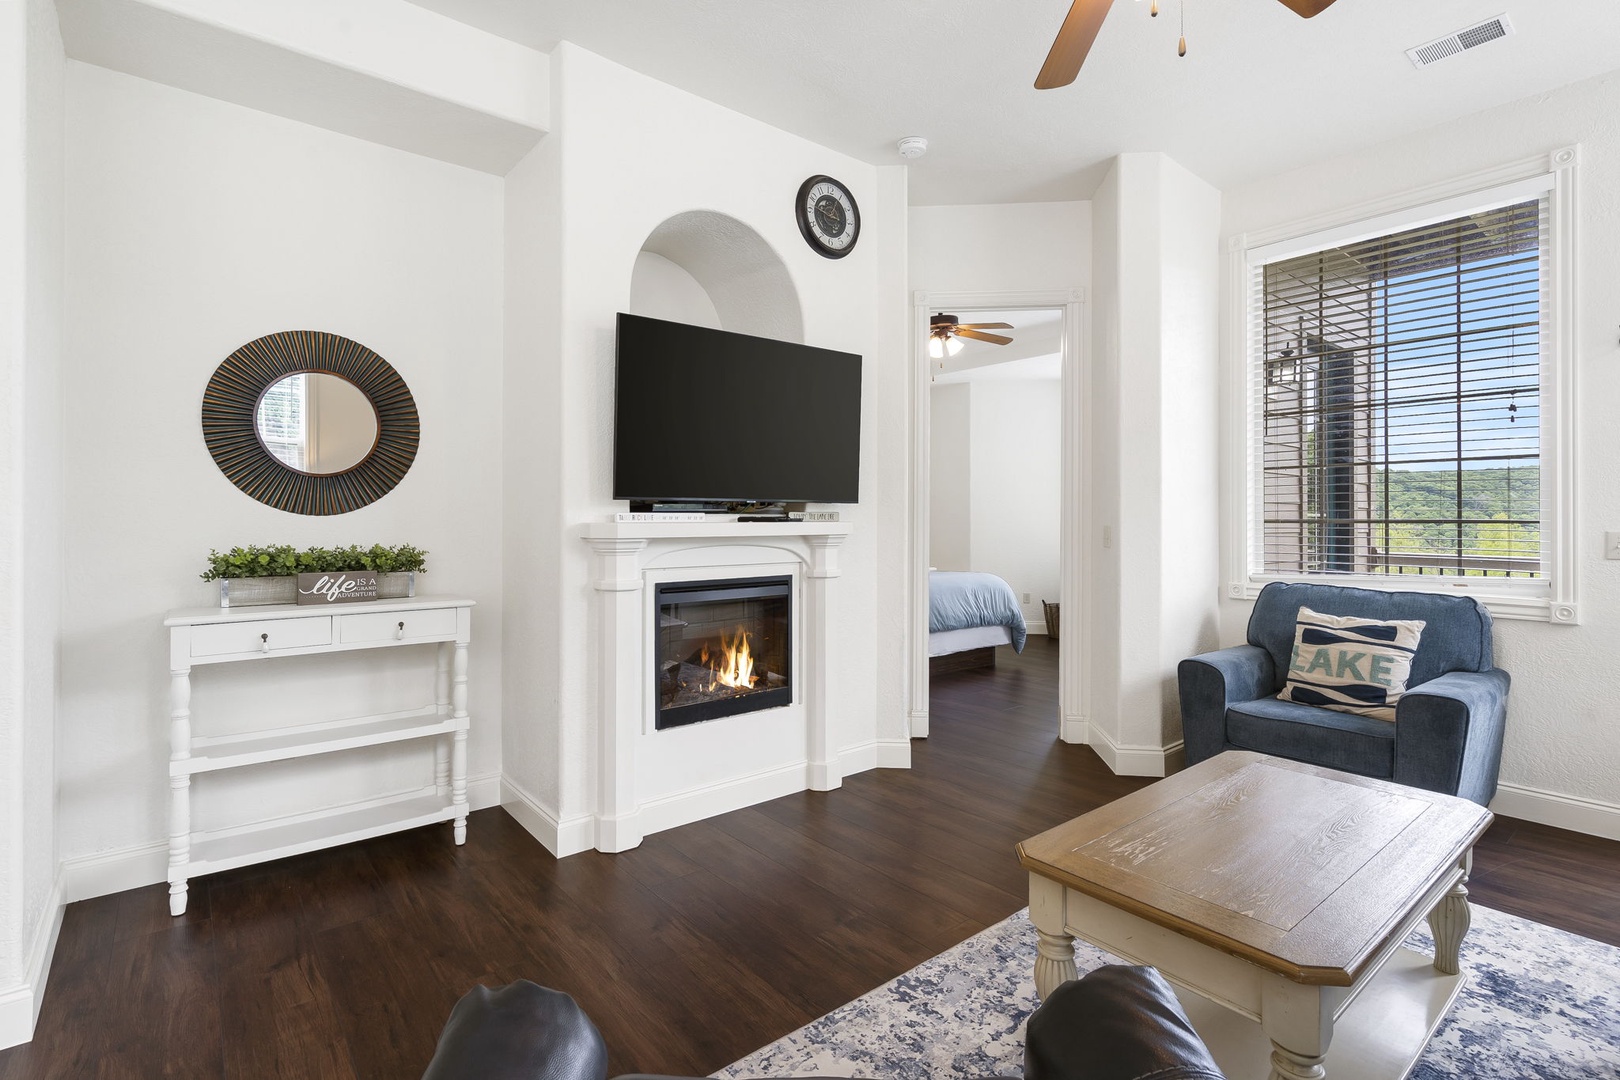 Curl up by the fireplace for a movie or to enjoy the views from the living room